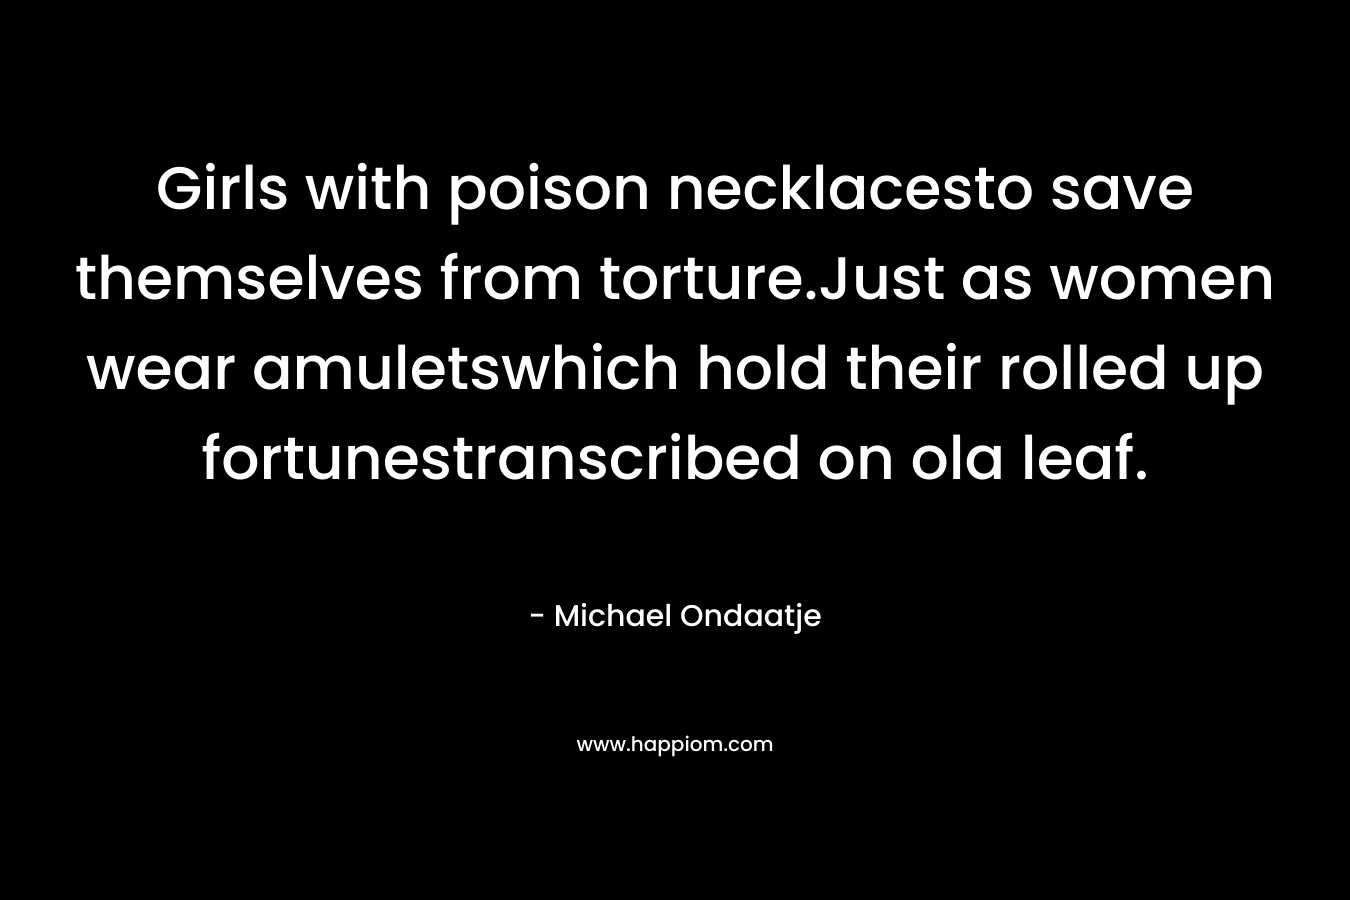 Girls with poison necklacesto save themselves from torture.Just as women wear amuletswhich hold their rolled up fortunestranscribed on ola leaf.